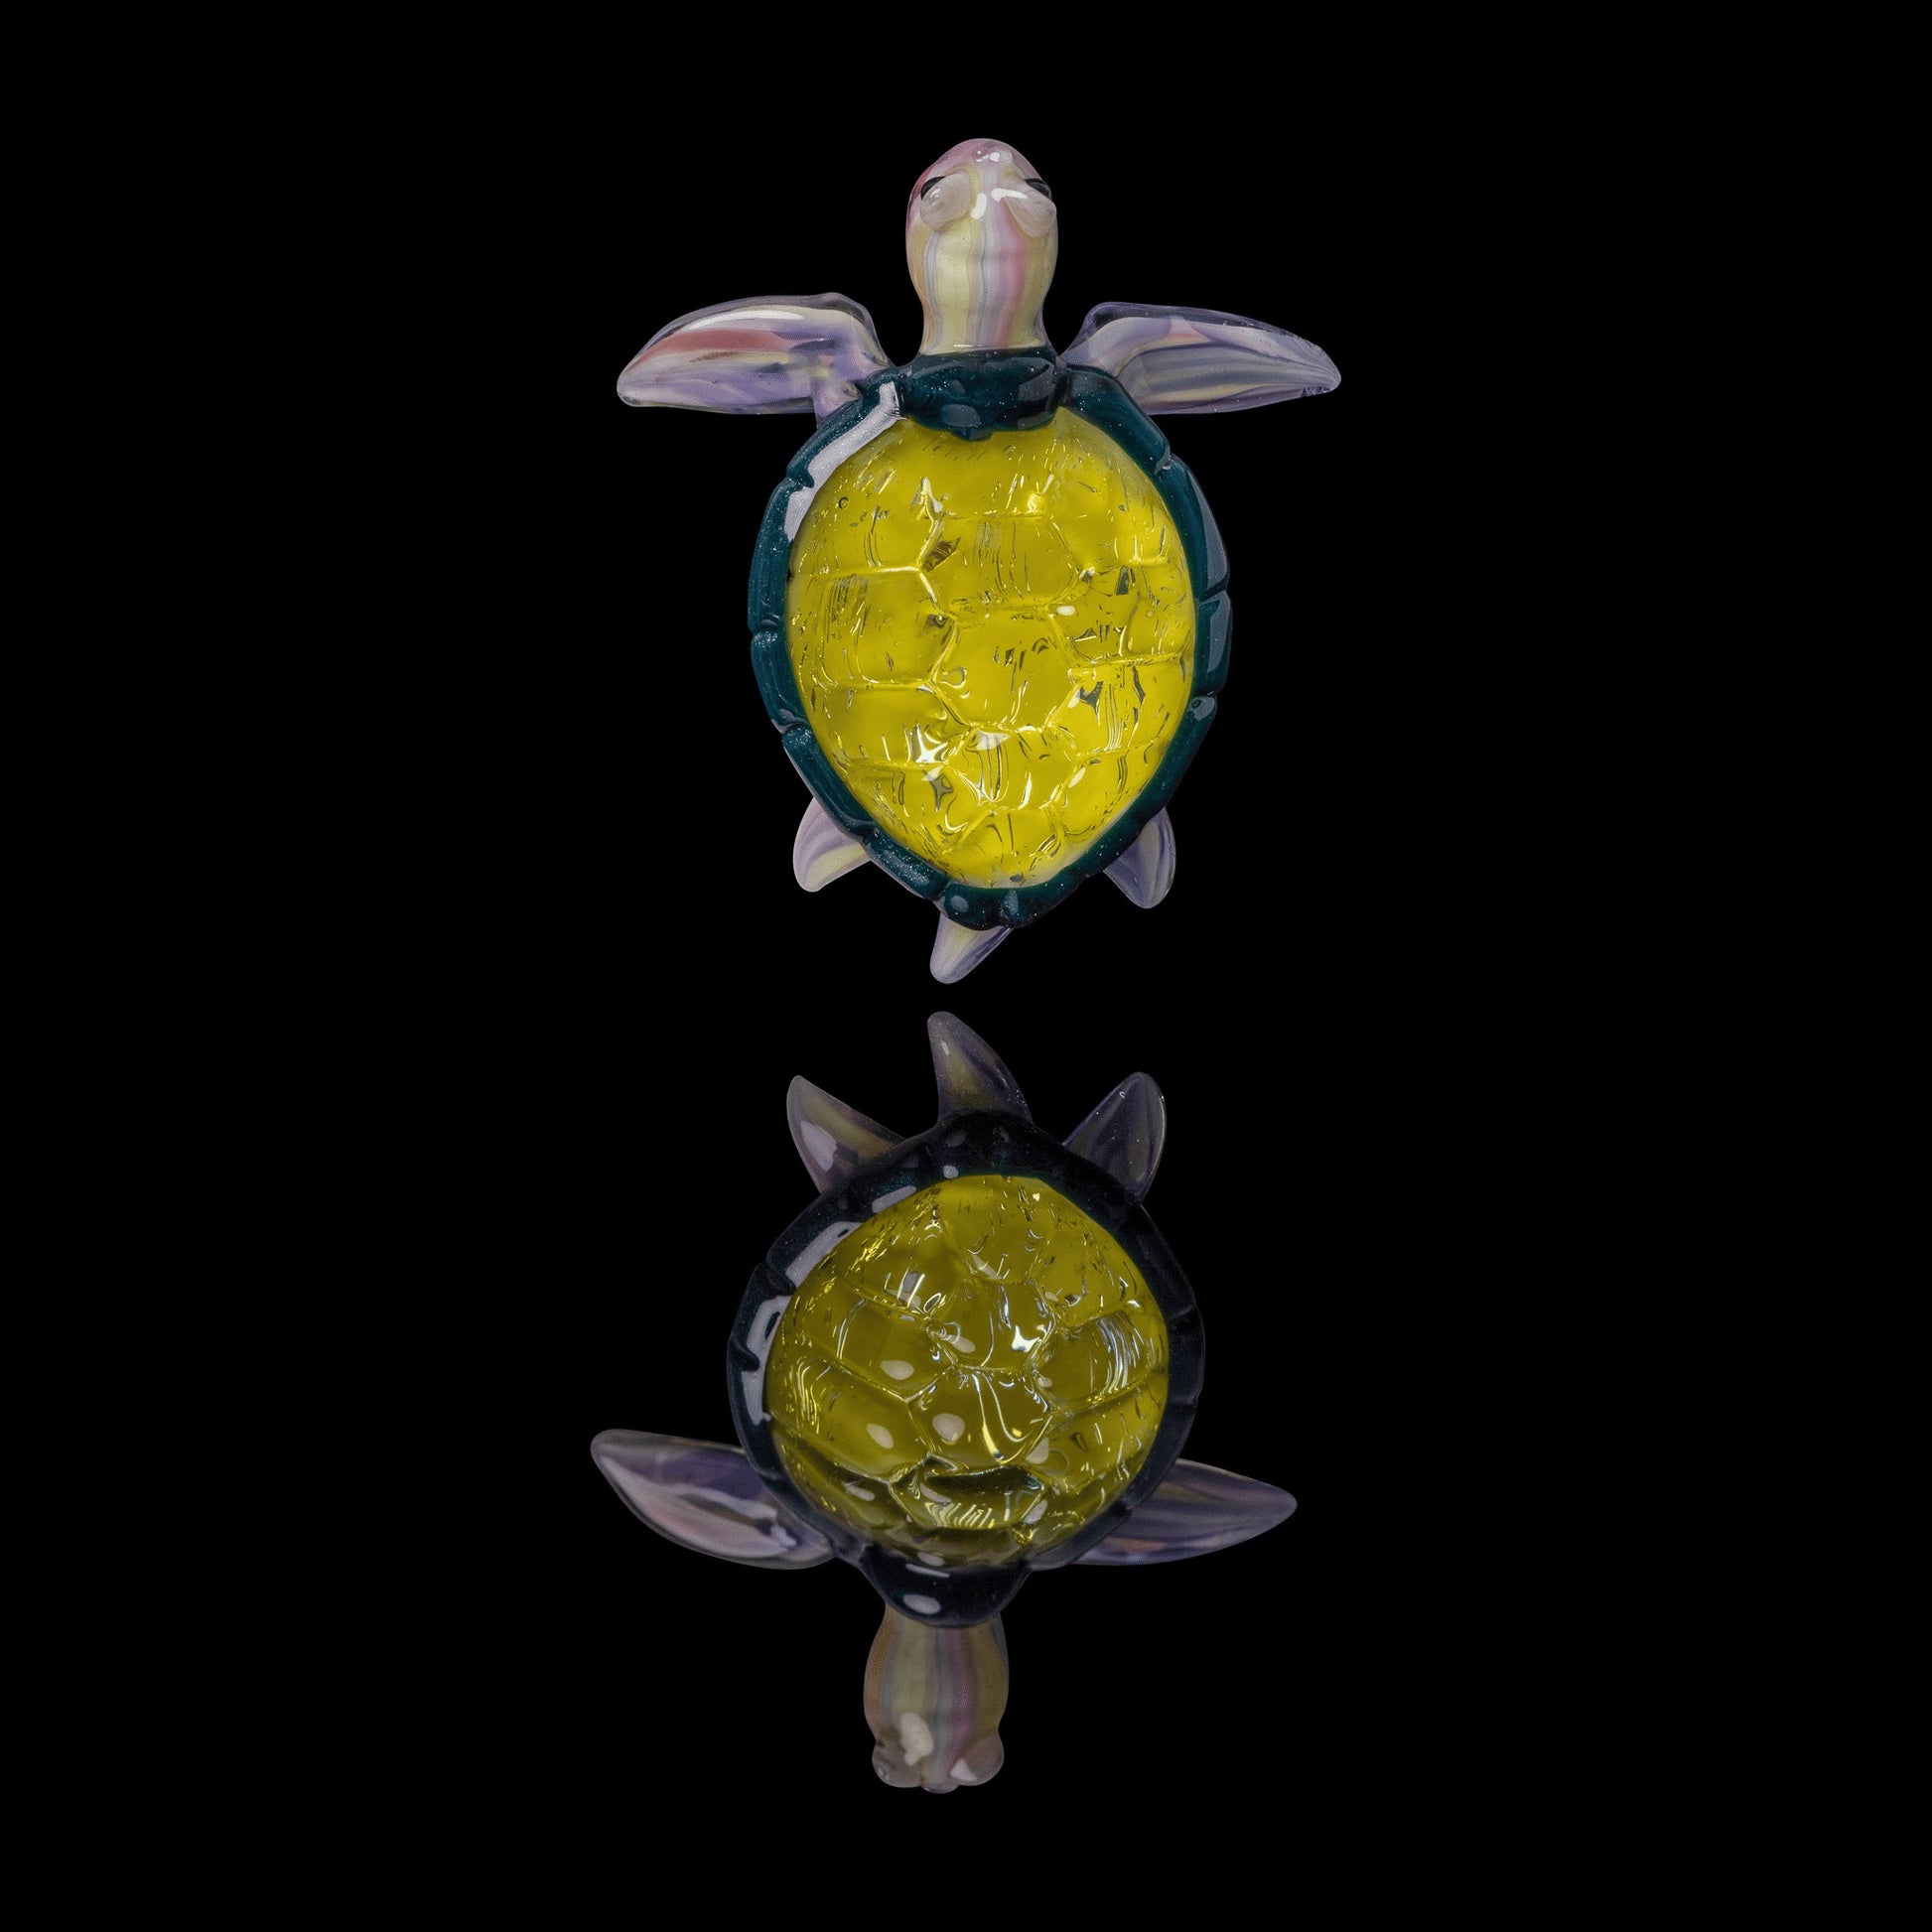 luxurious glass pendant - Collab Turtle Pendant by Turtle Time Glass x Scomo Moanet (Scribble Season 2022)